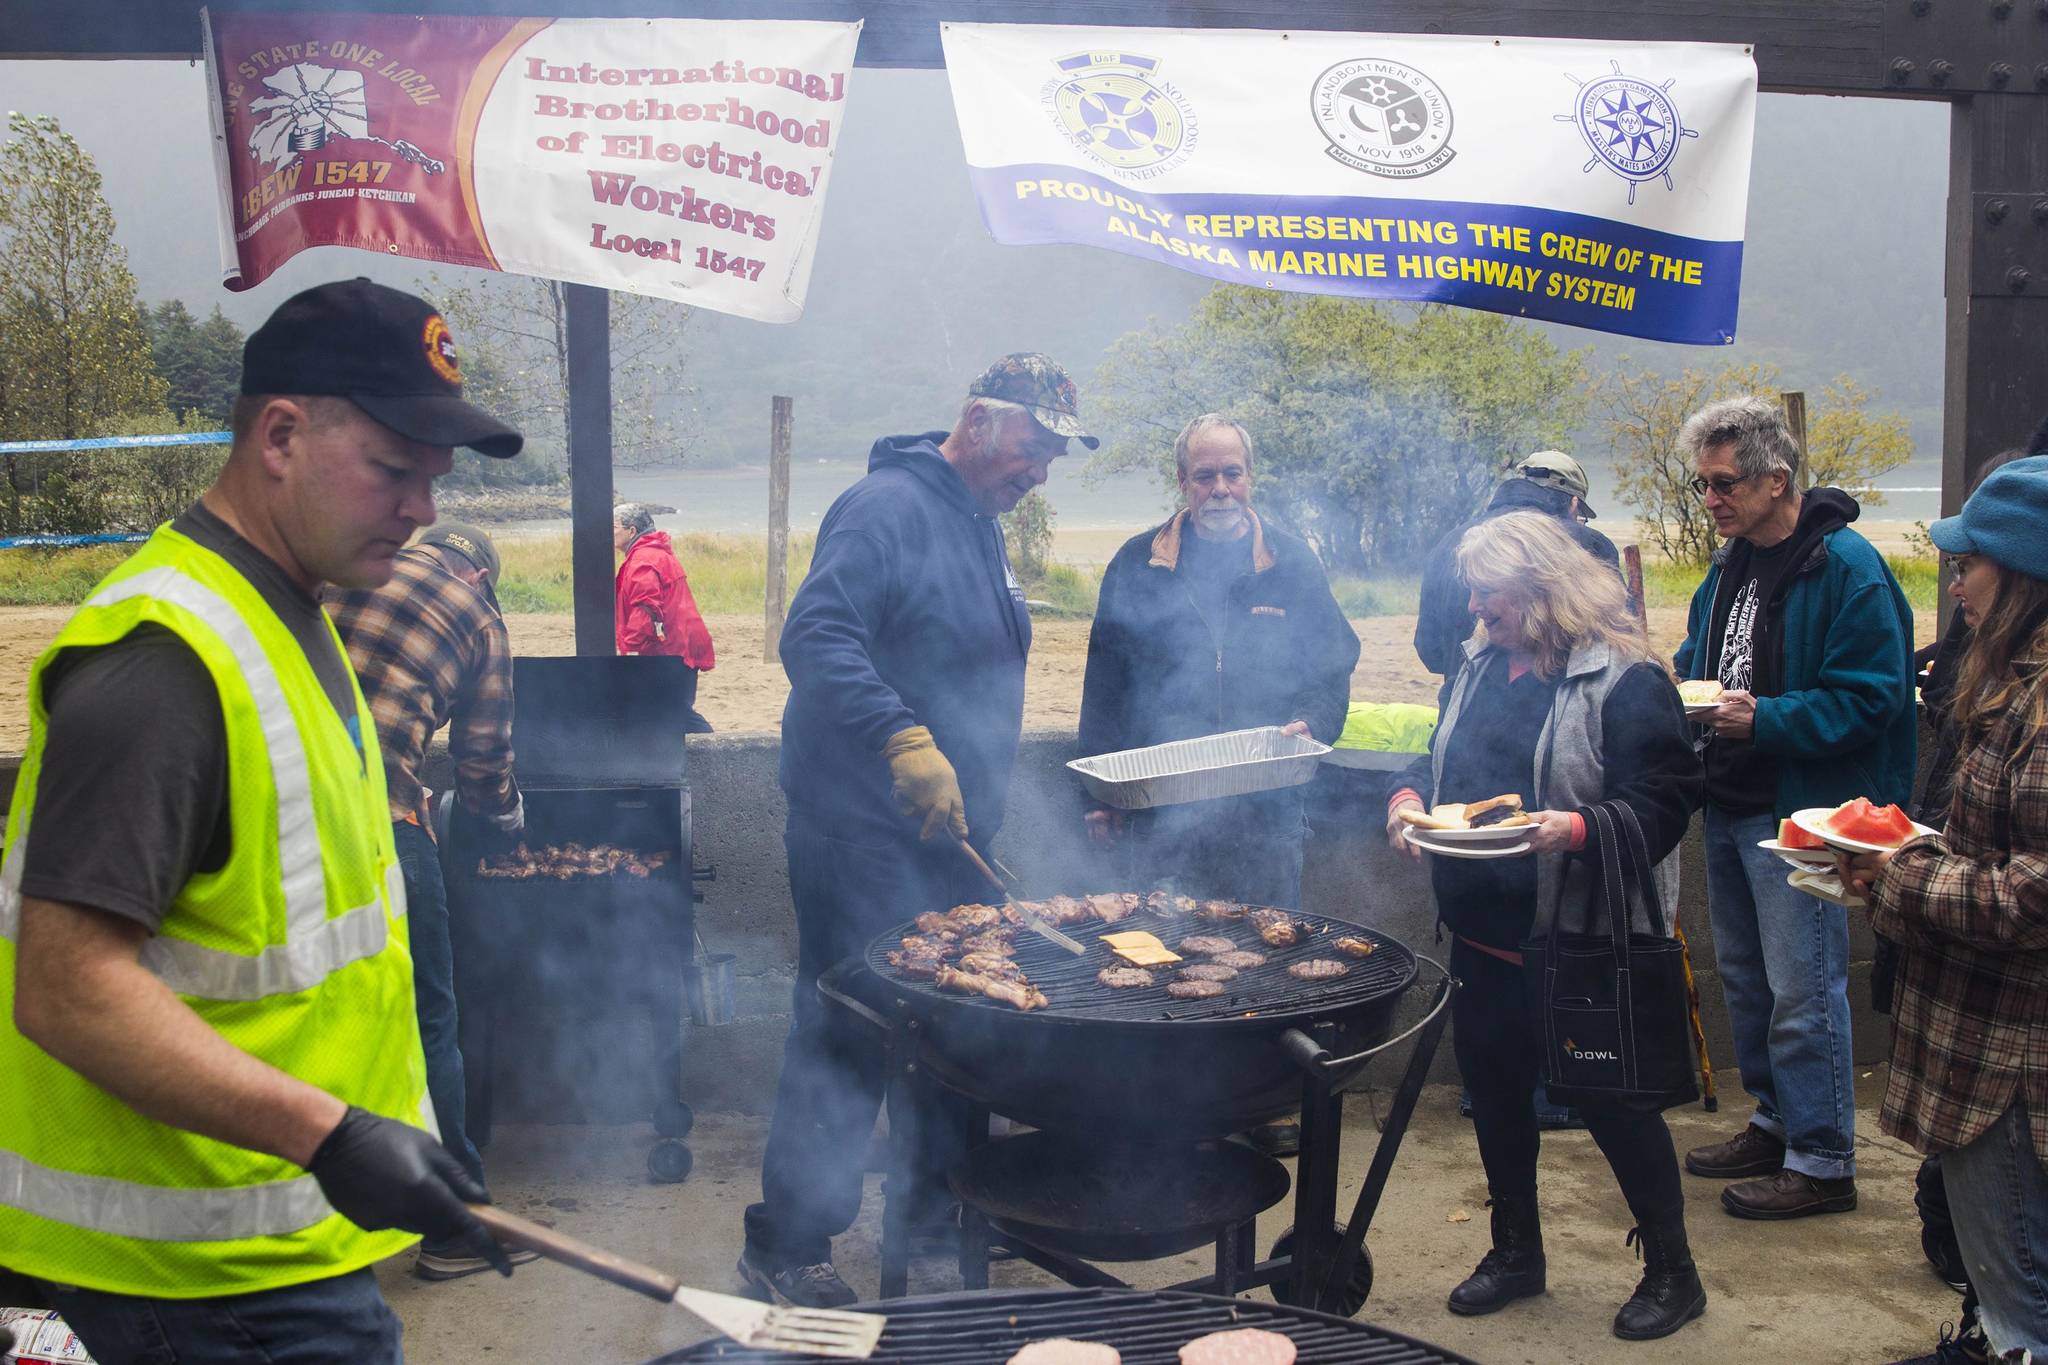 The Juneau Central Labor Council held its annual Labor Day picnic for Juneau residents at Savikko Park, Sept. 2, 2019. (Michael S. Lockett | Juneau Empire)